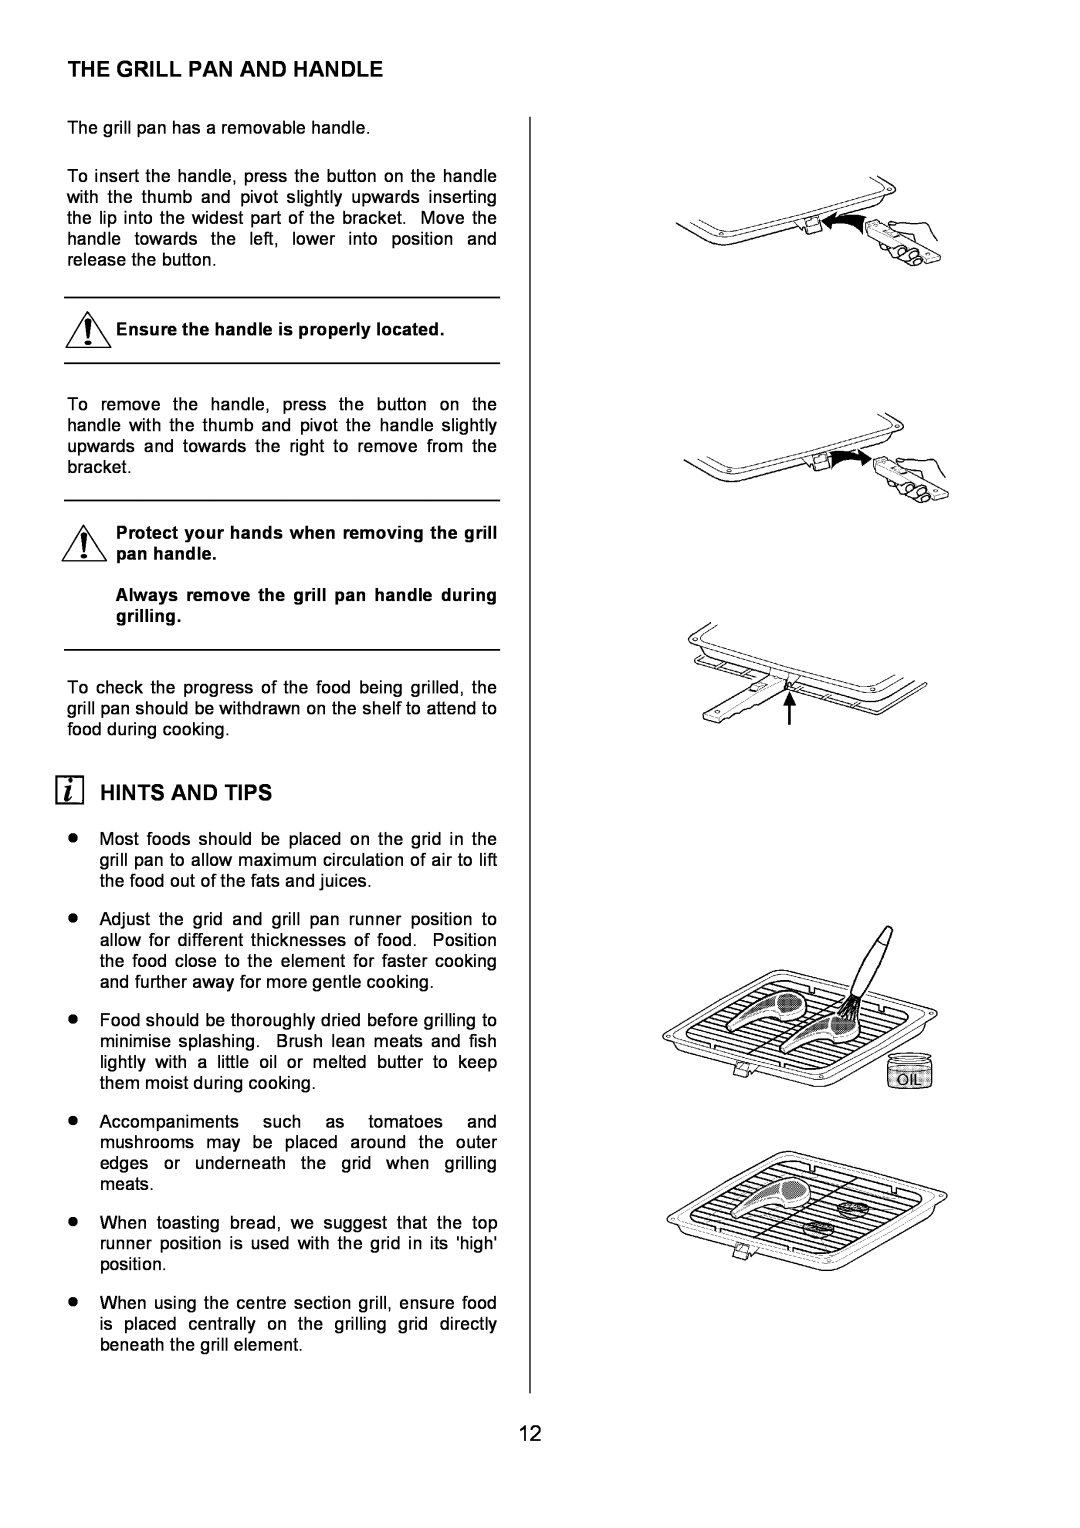 Zanussi ZOU 330 manual The Grill Pan And Handle, Hints And Tips, Ensure the handle is properly located 